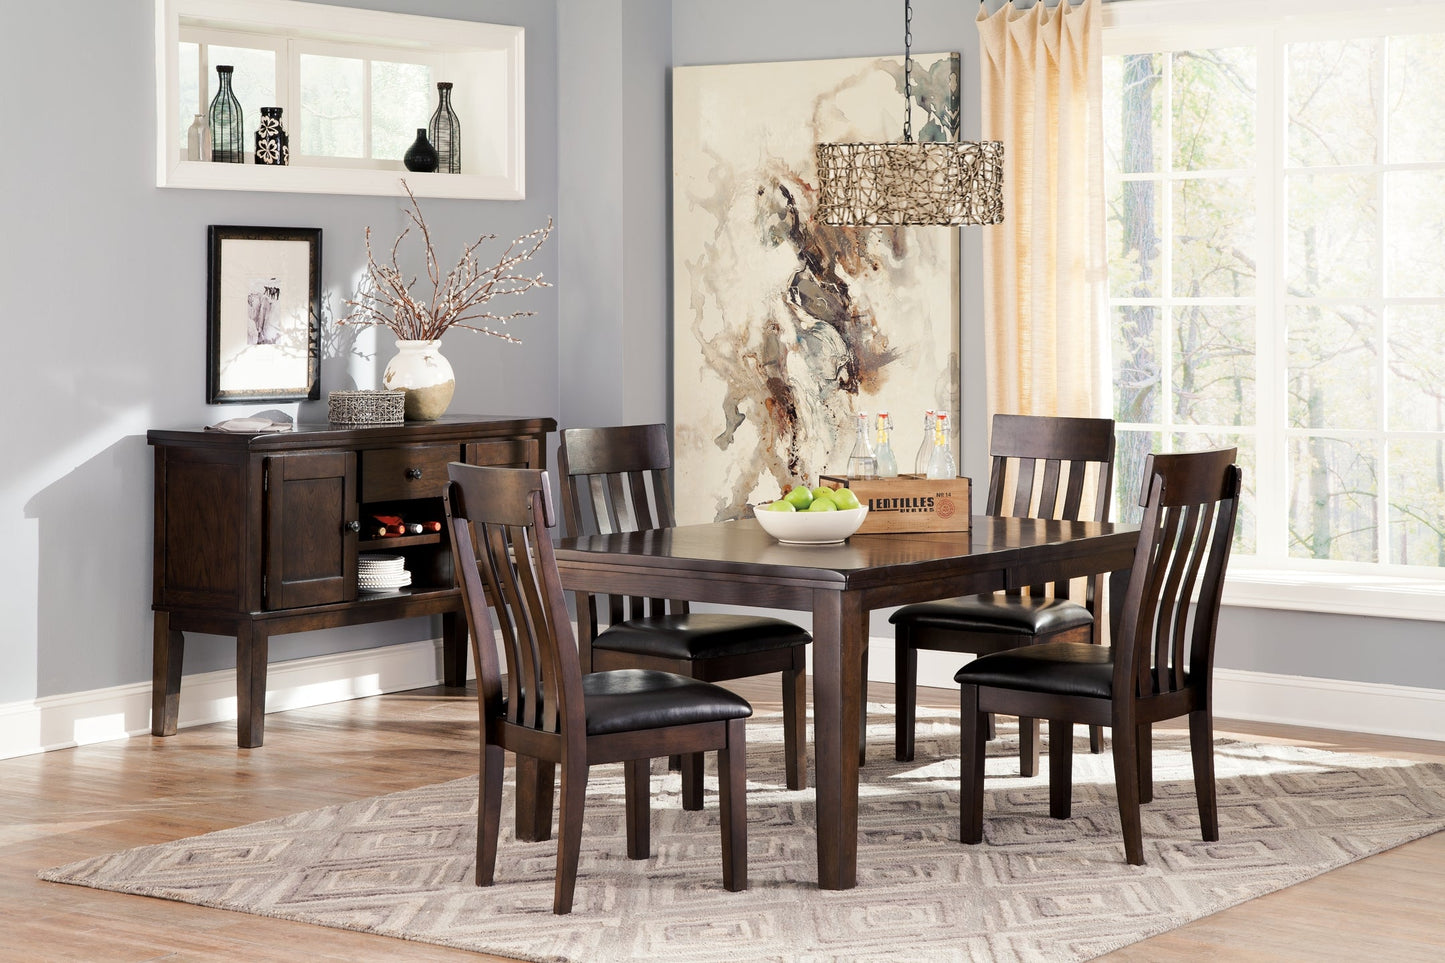 Haddigan Dining Table and 4 Chairs at Walker Mattress and Furniture Locations in Cedar Park and Belton TX.